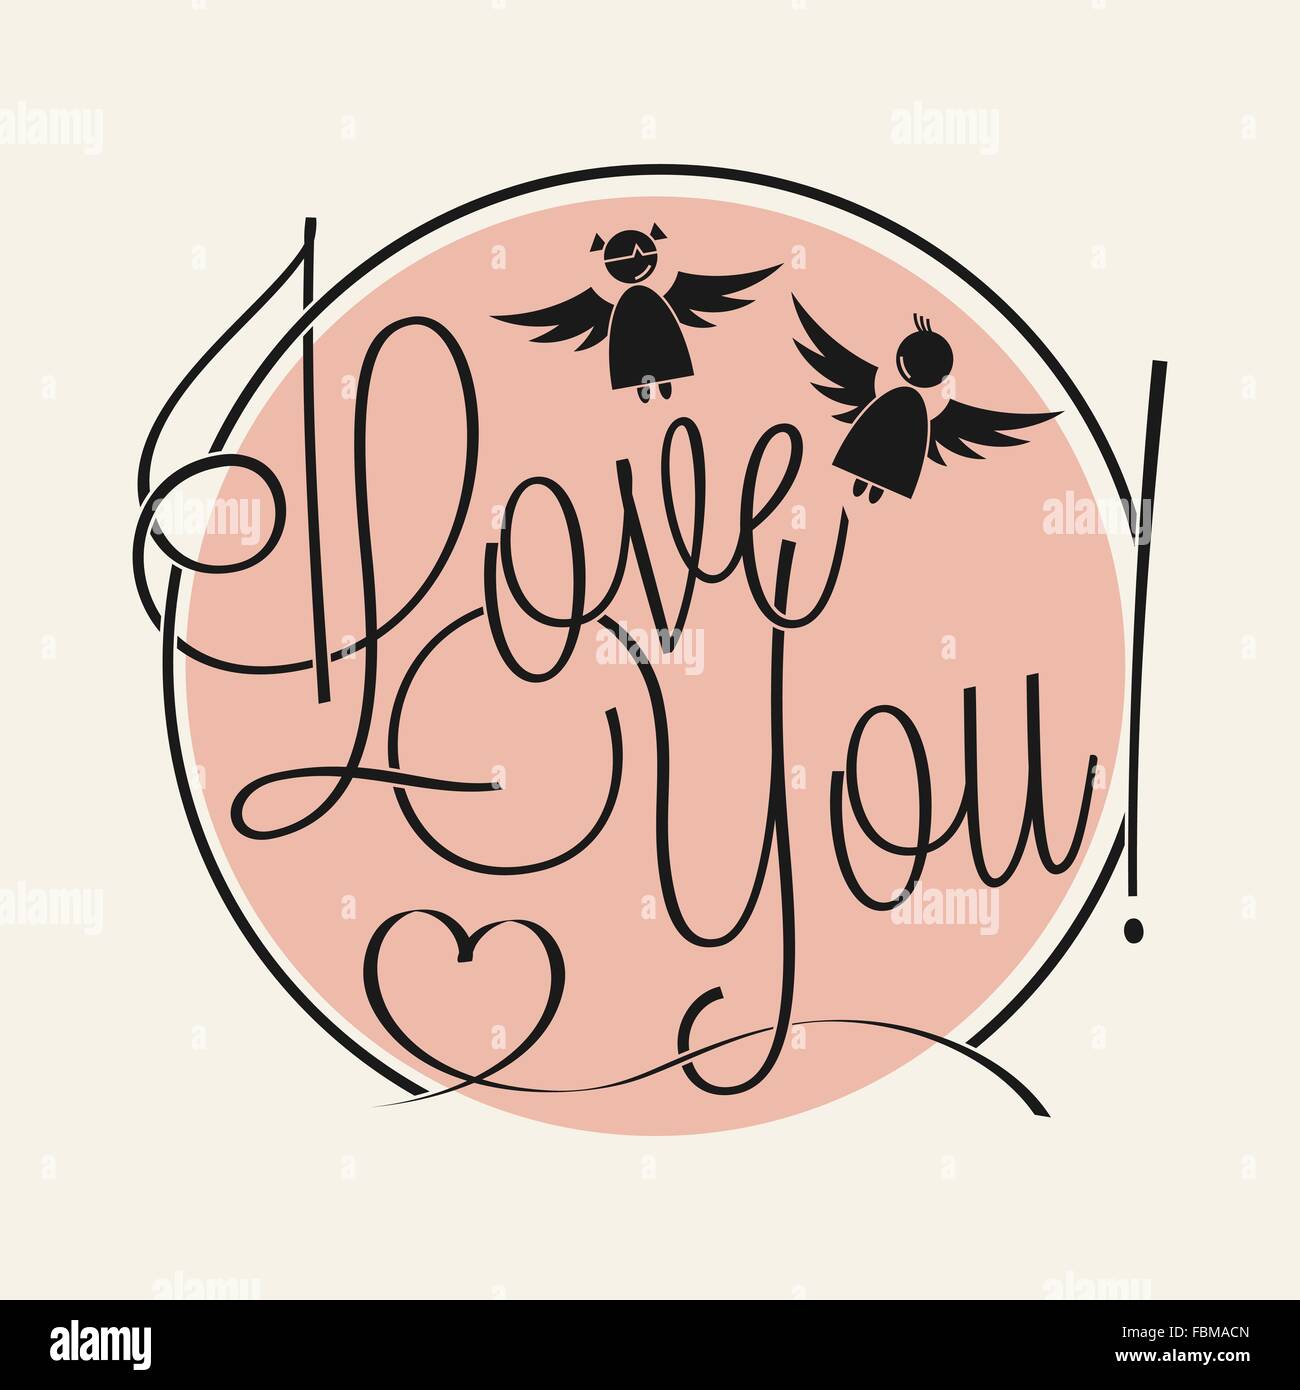 I Love You hand lettering for your design Stock Vector